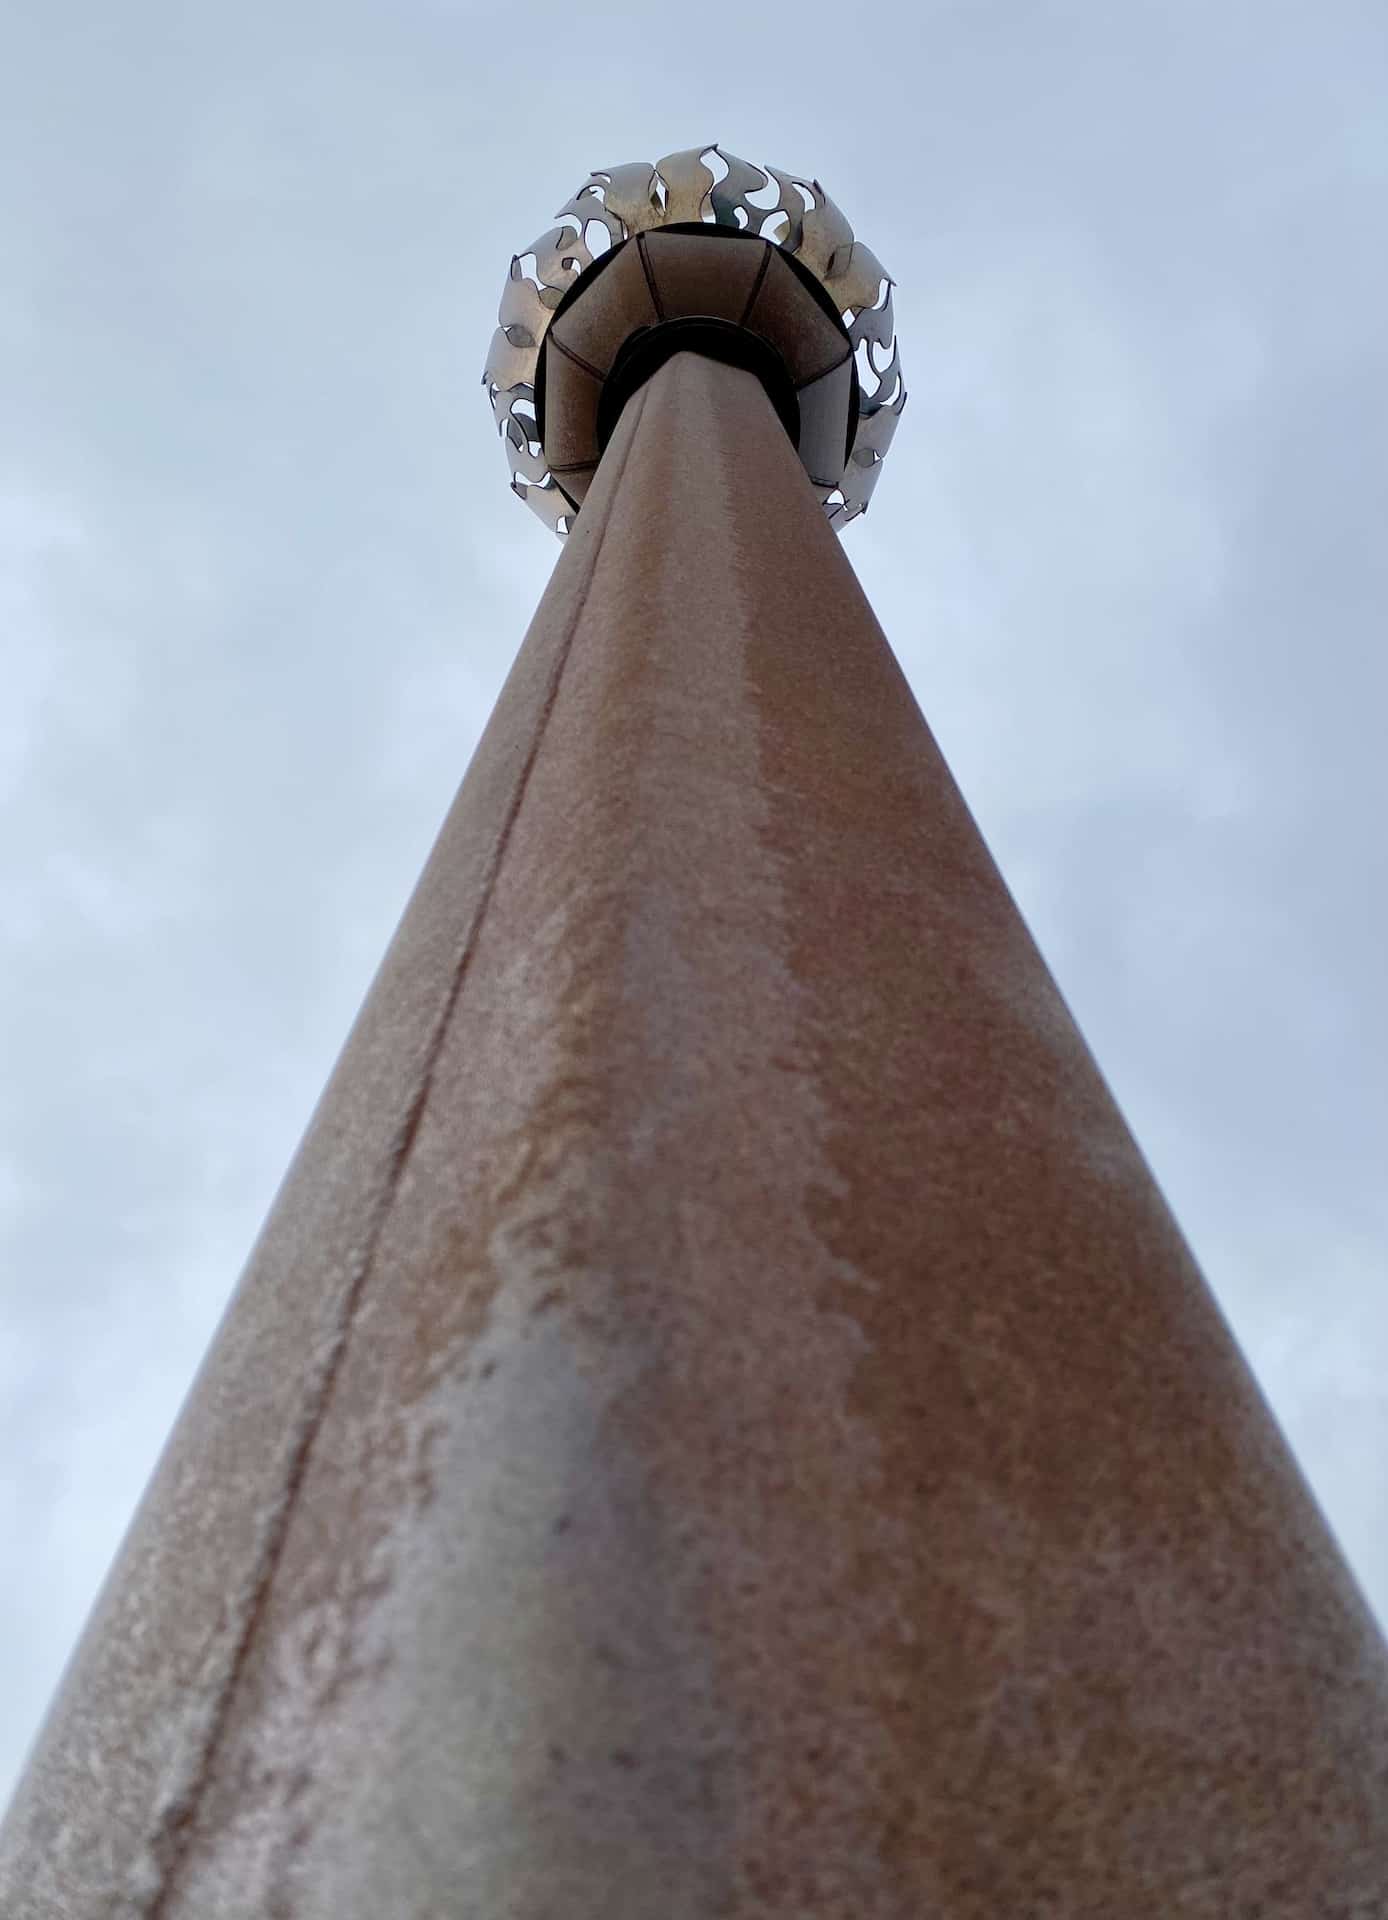 Standing at an impressive 5.5 metres high, the new Danby Beacon proudly symbolises the history and heritage of the parish.